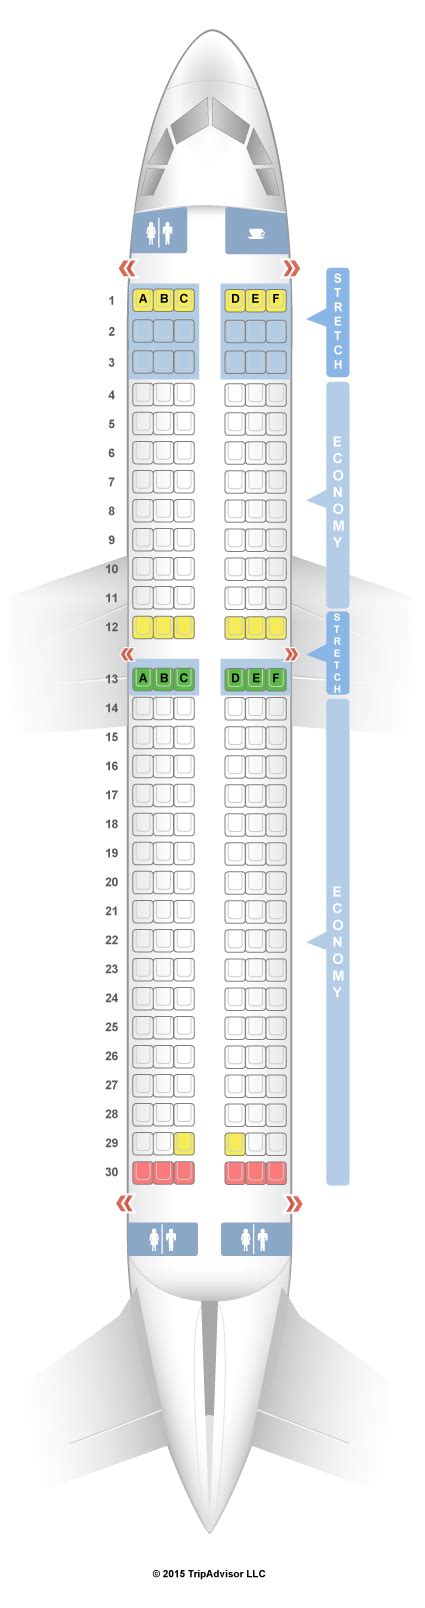 Frontier Airbus A320 Seating Chart Image To U